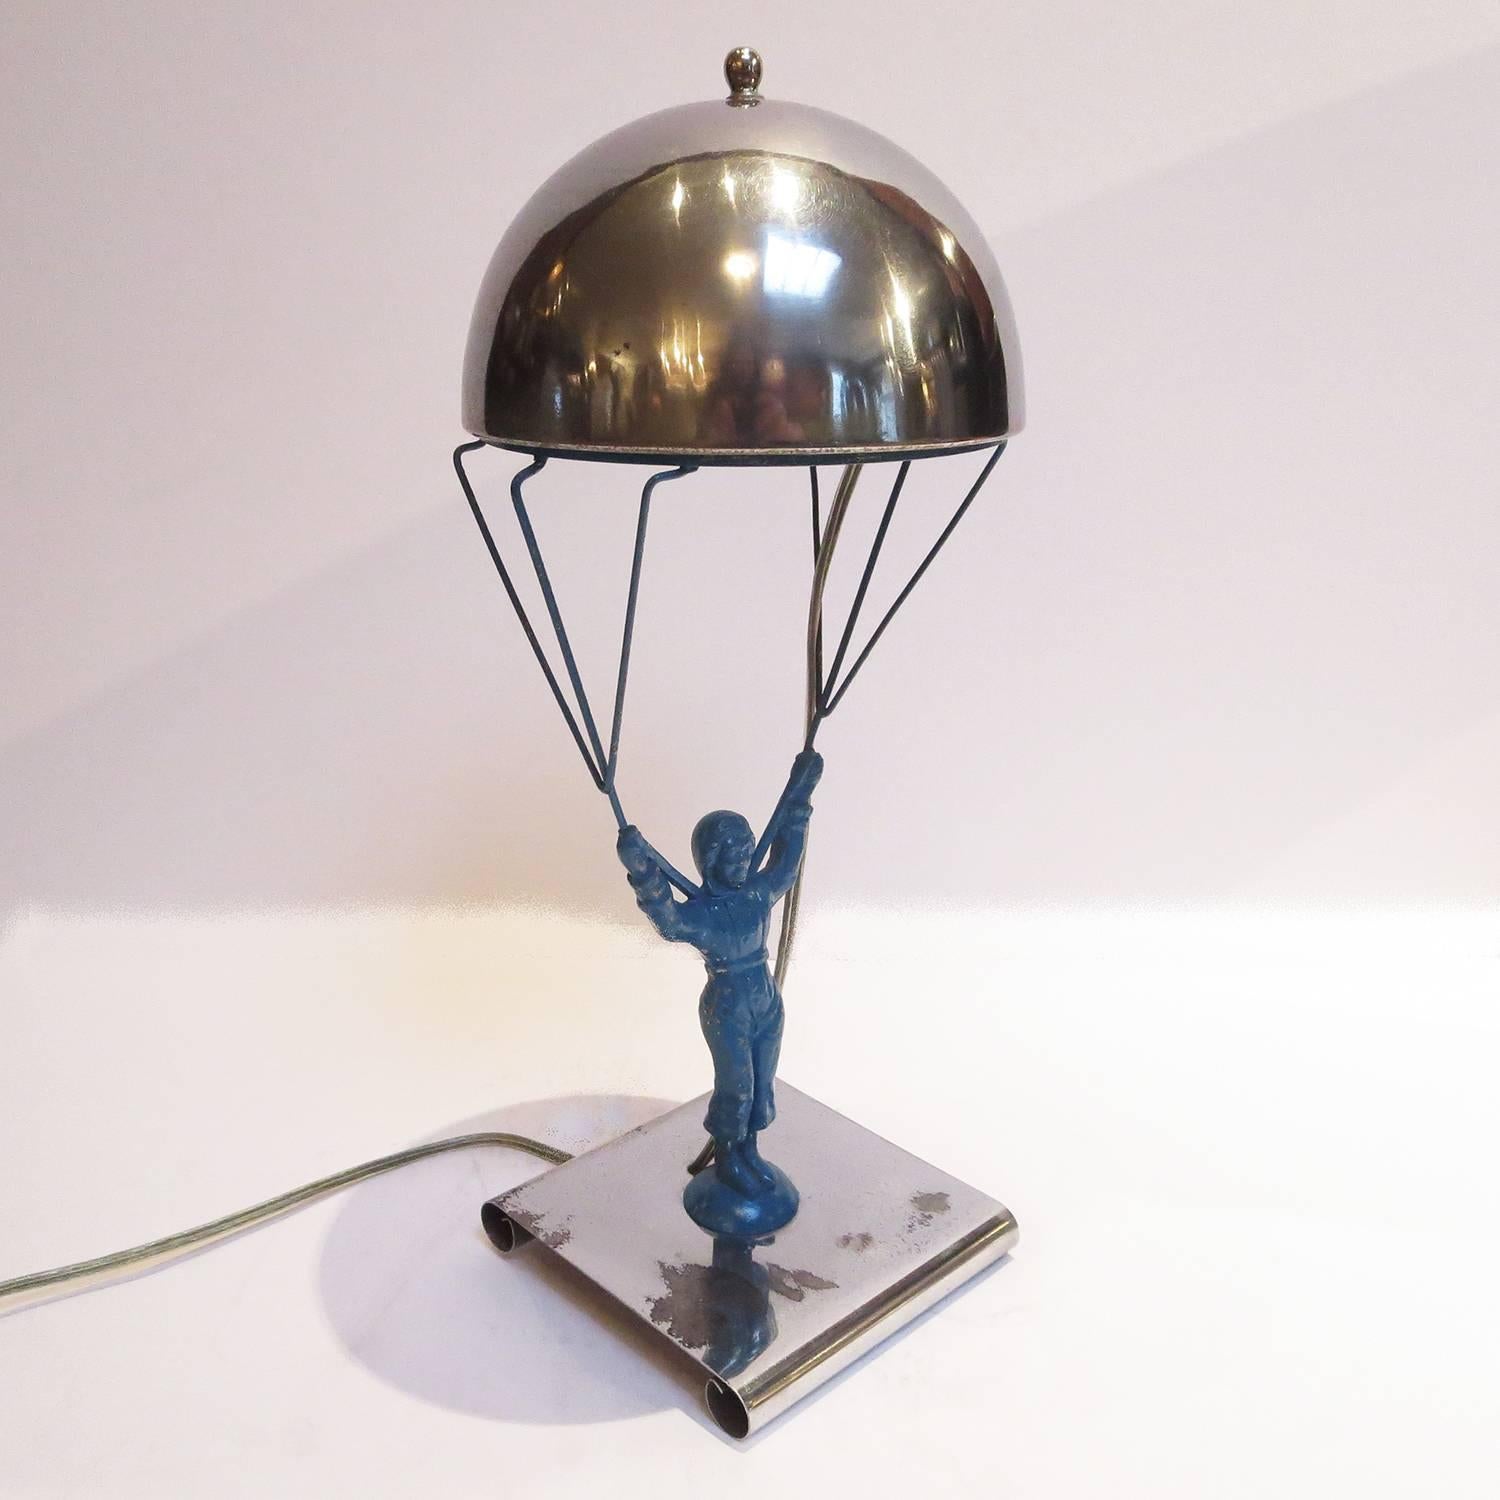 Art Deco "Novelty Parachute Jumper Lamp" by Premium Products